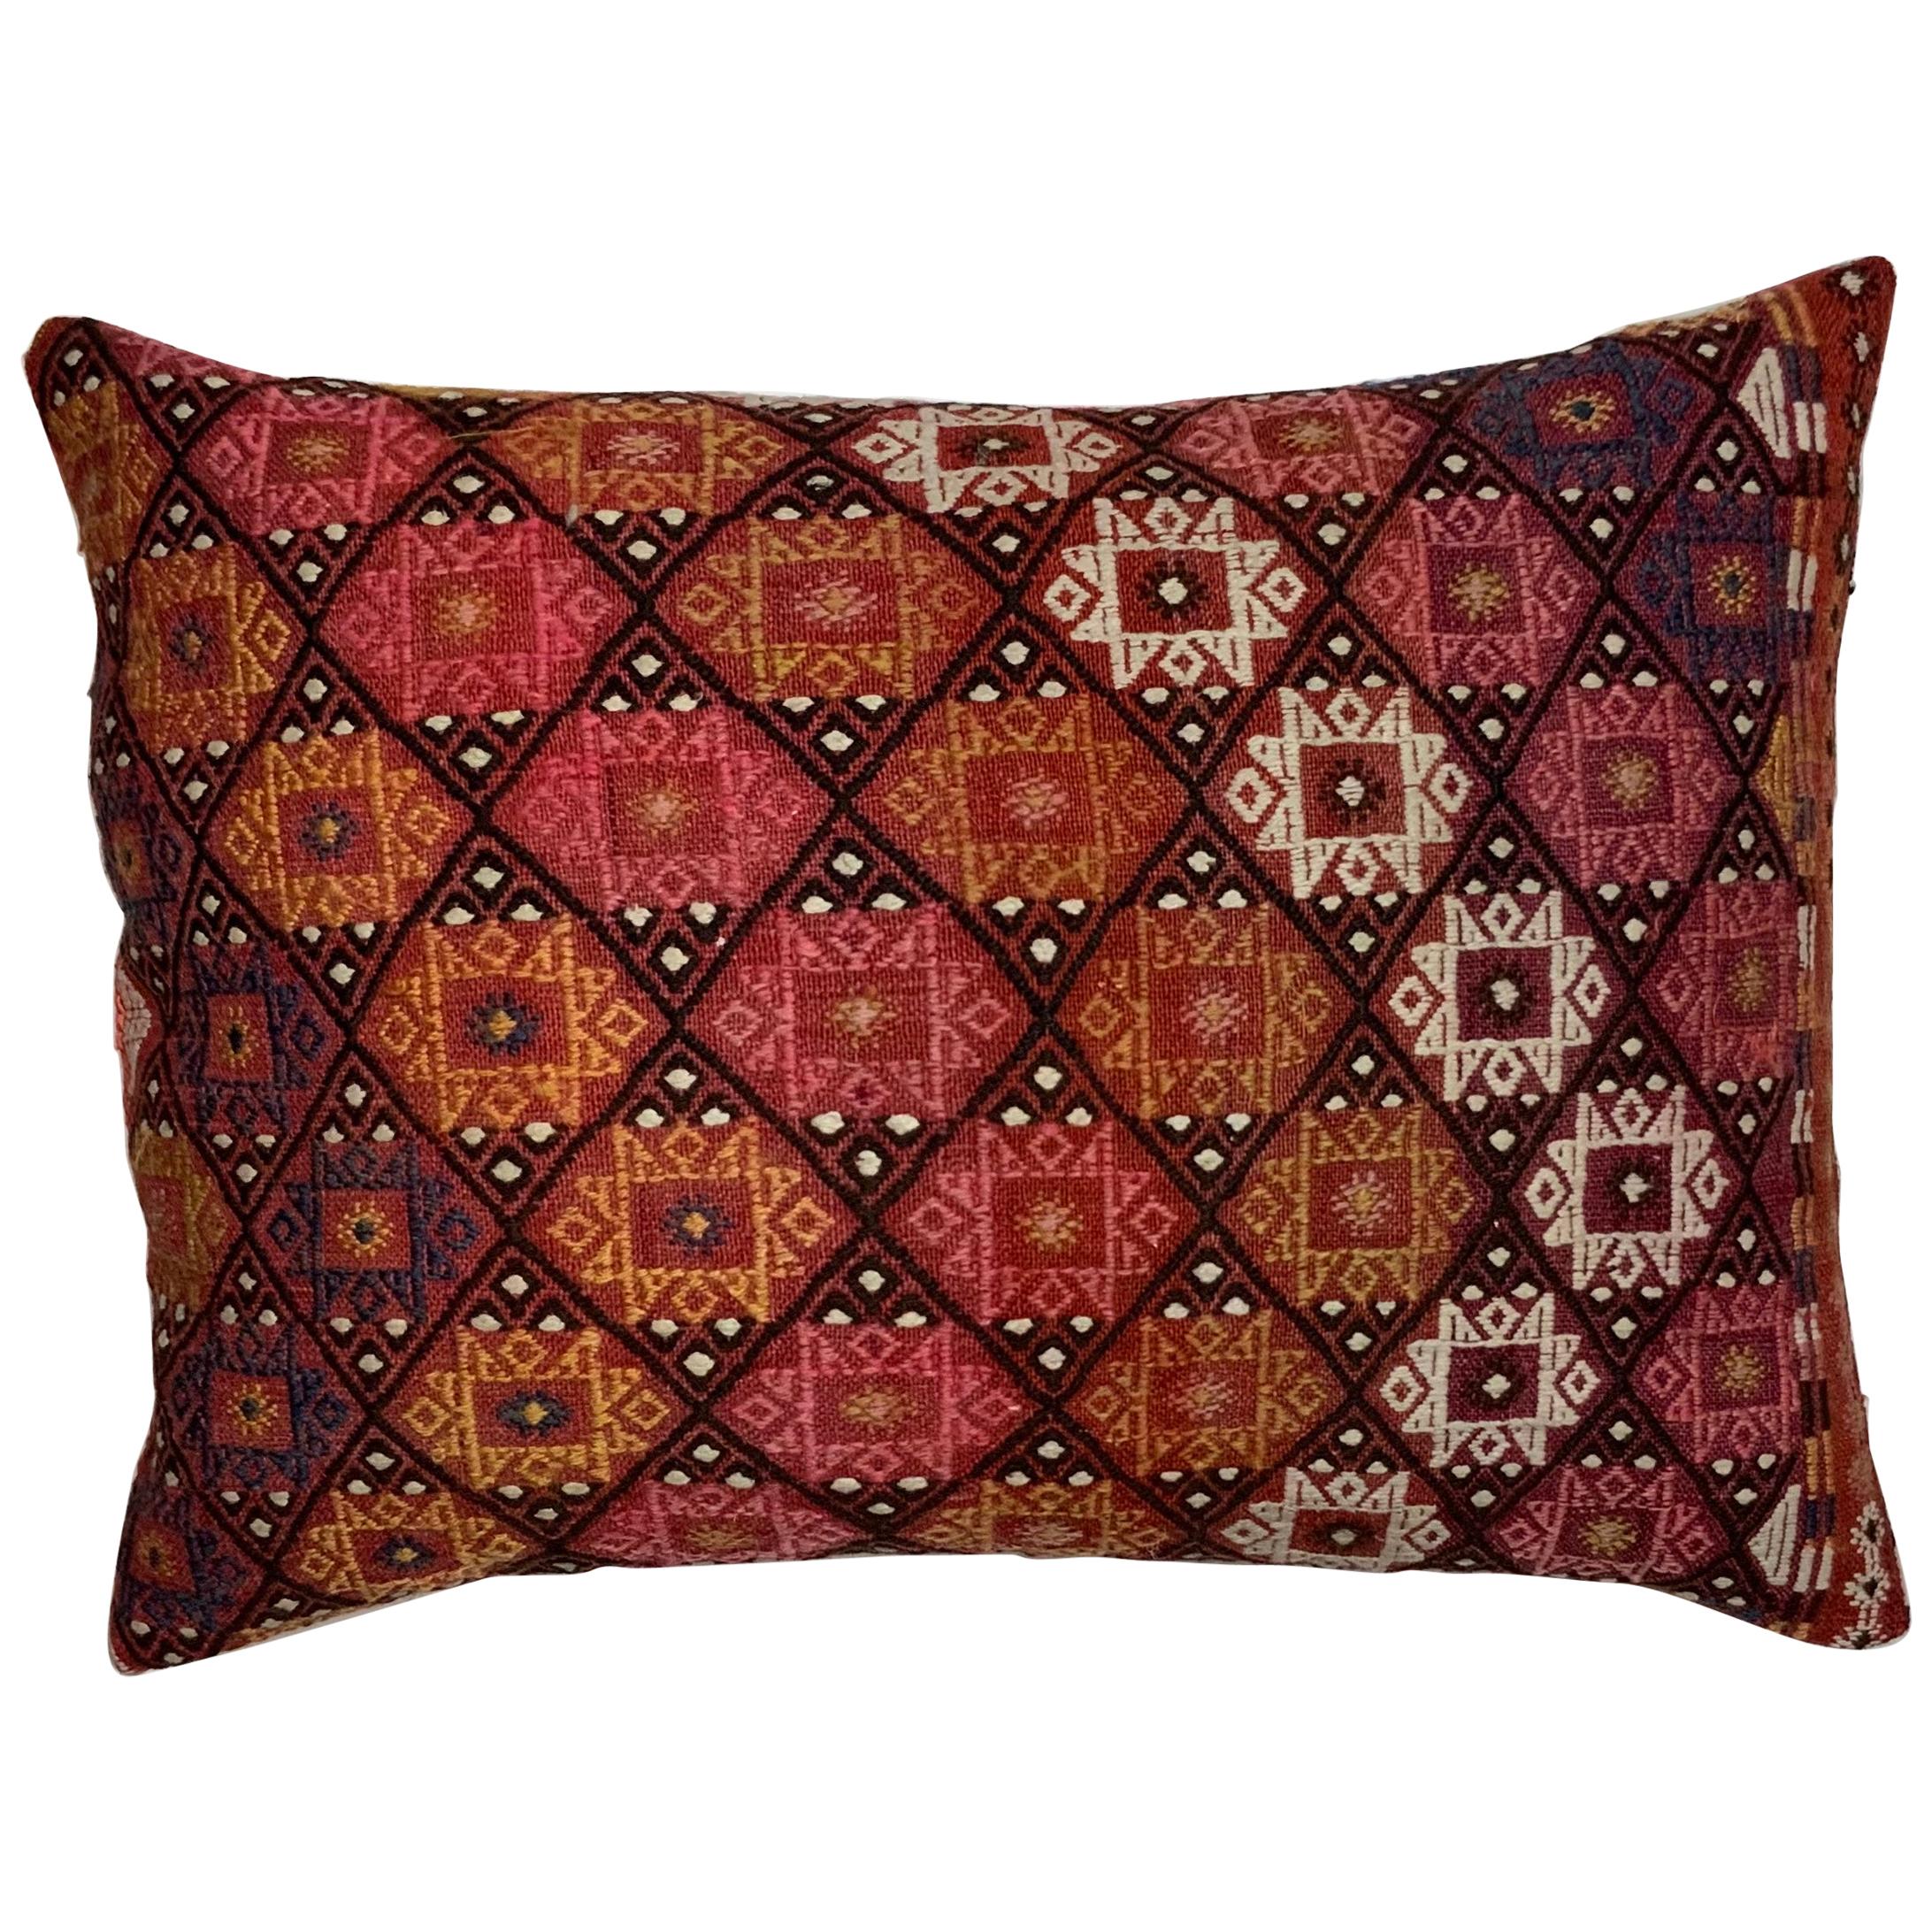 Single Vintage Hand Embroidery Pillow